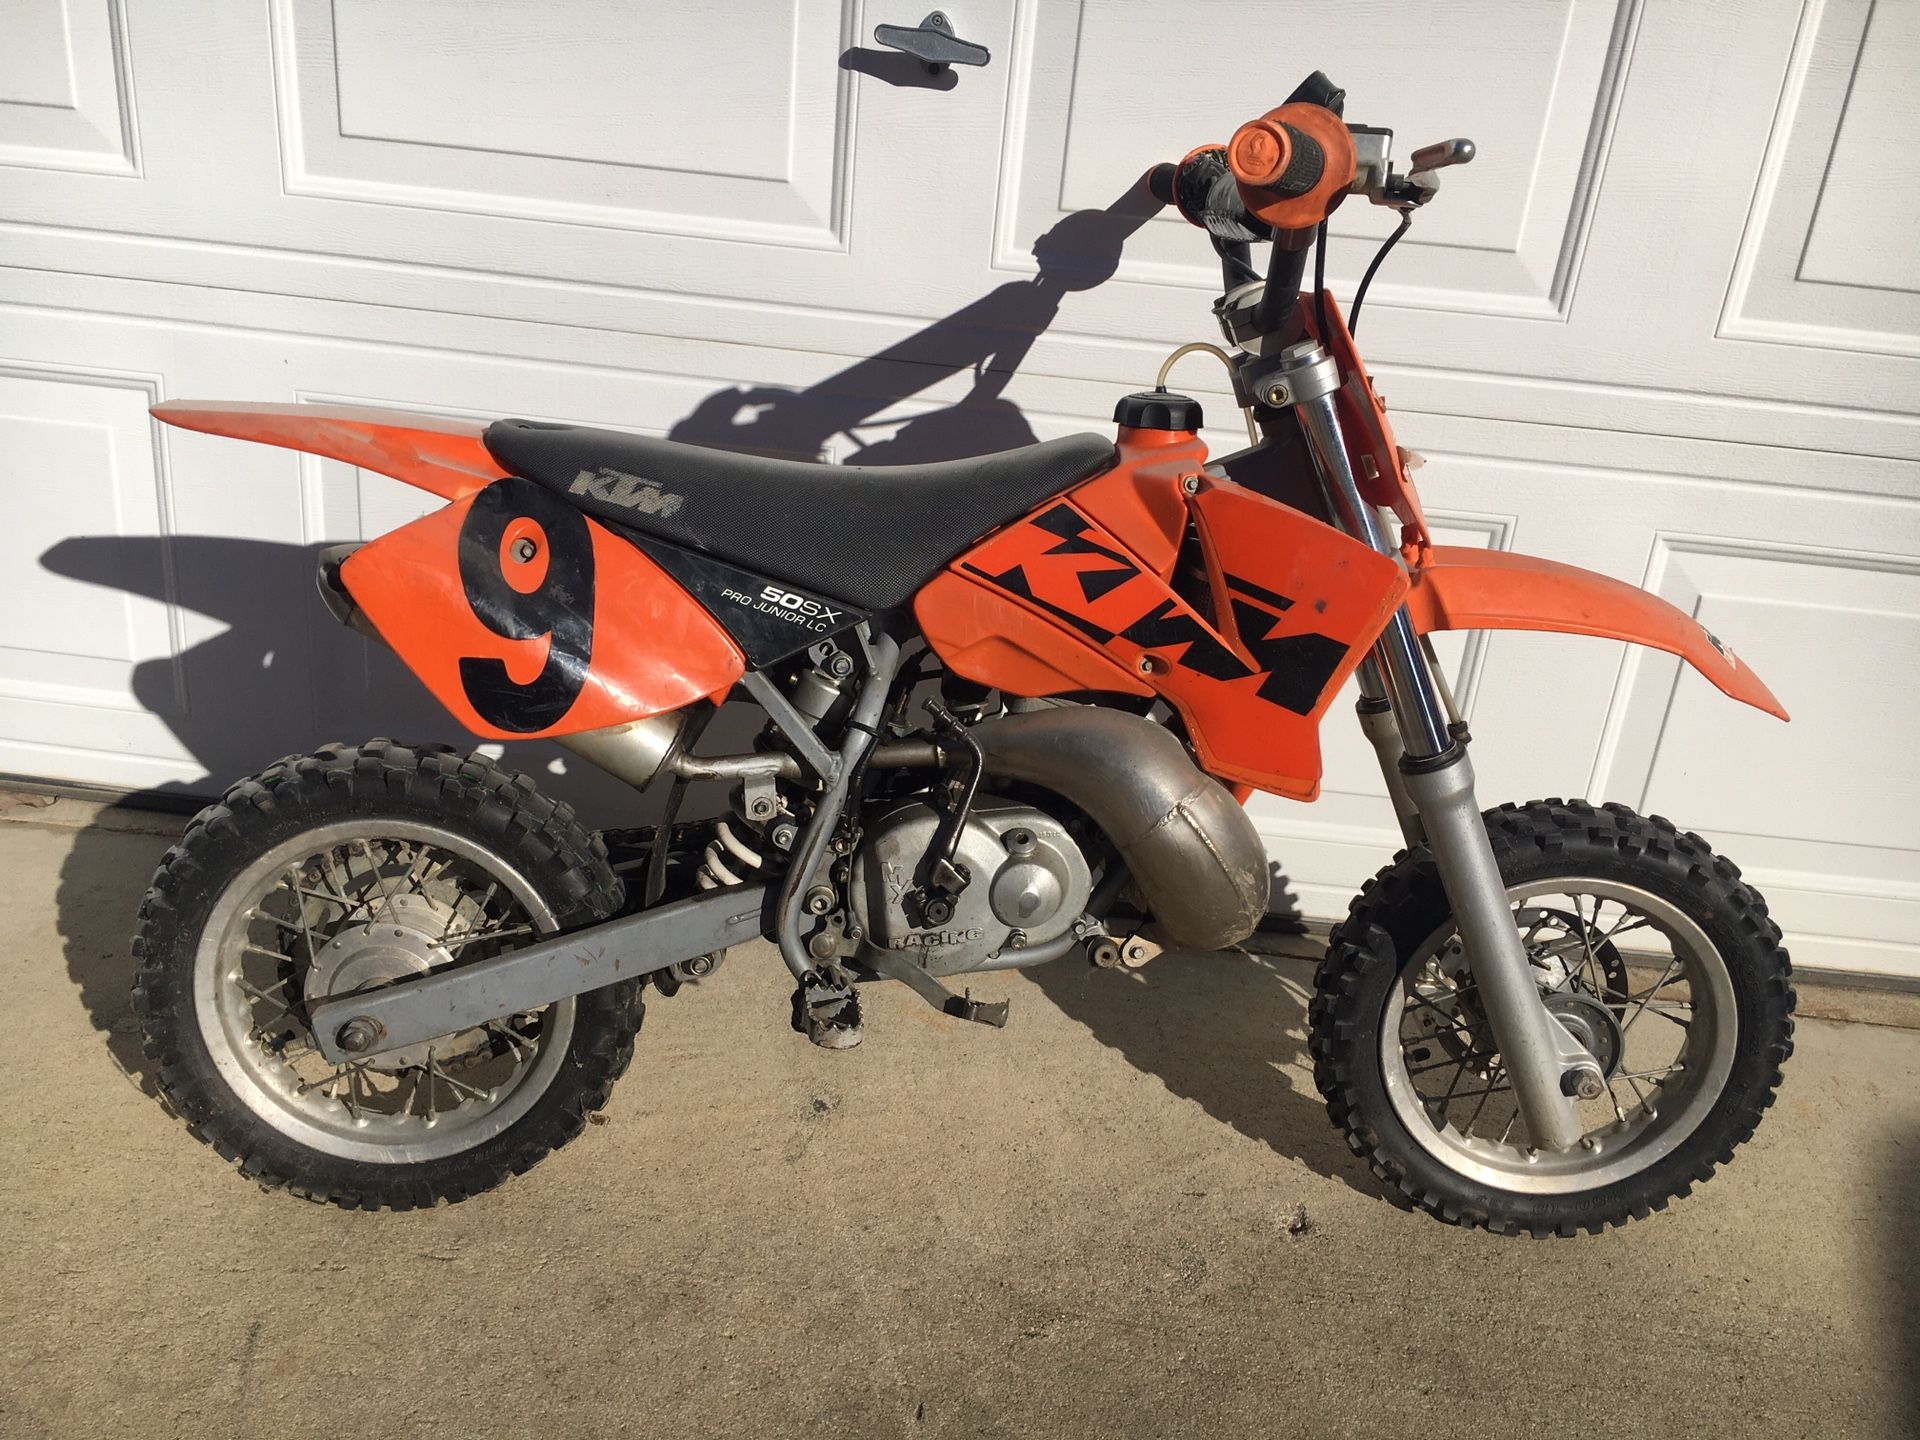 KTM 50 Pro Jr LC   small motorcycle dirtbike